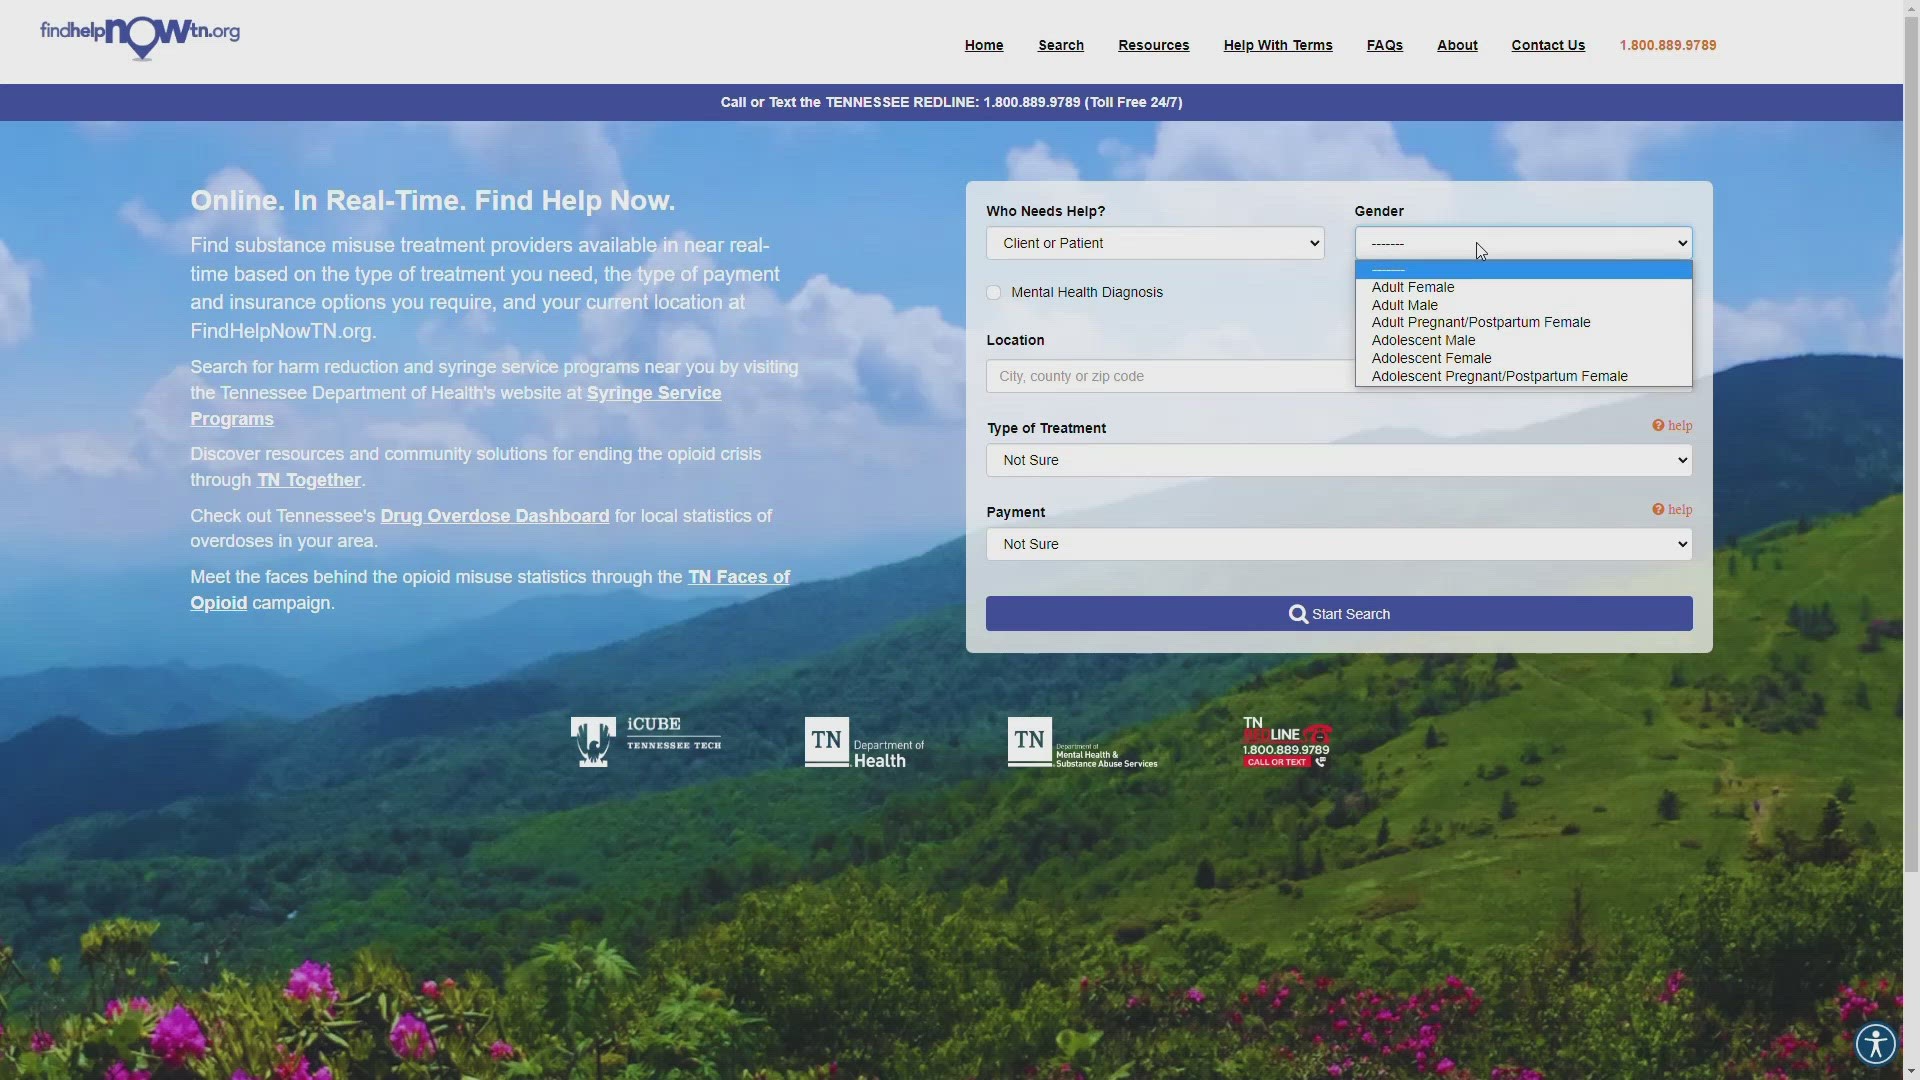 The Tennessee Department of Health helped develop the website, which guides people to location-based services available at substance-use treatment facilities.